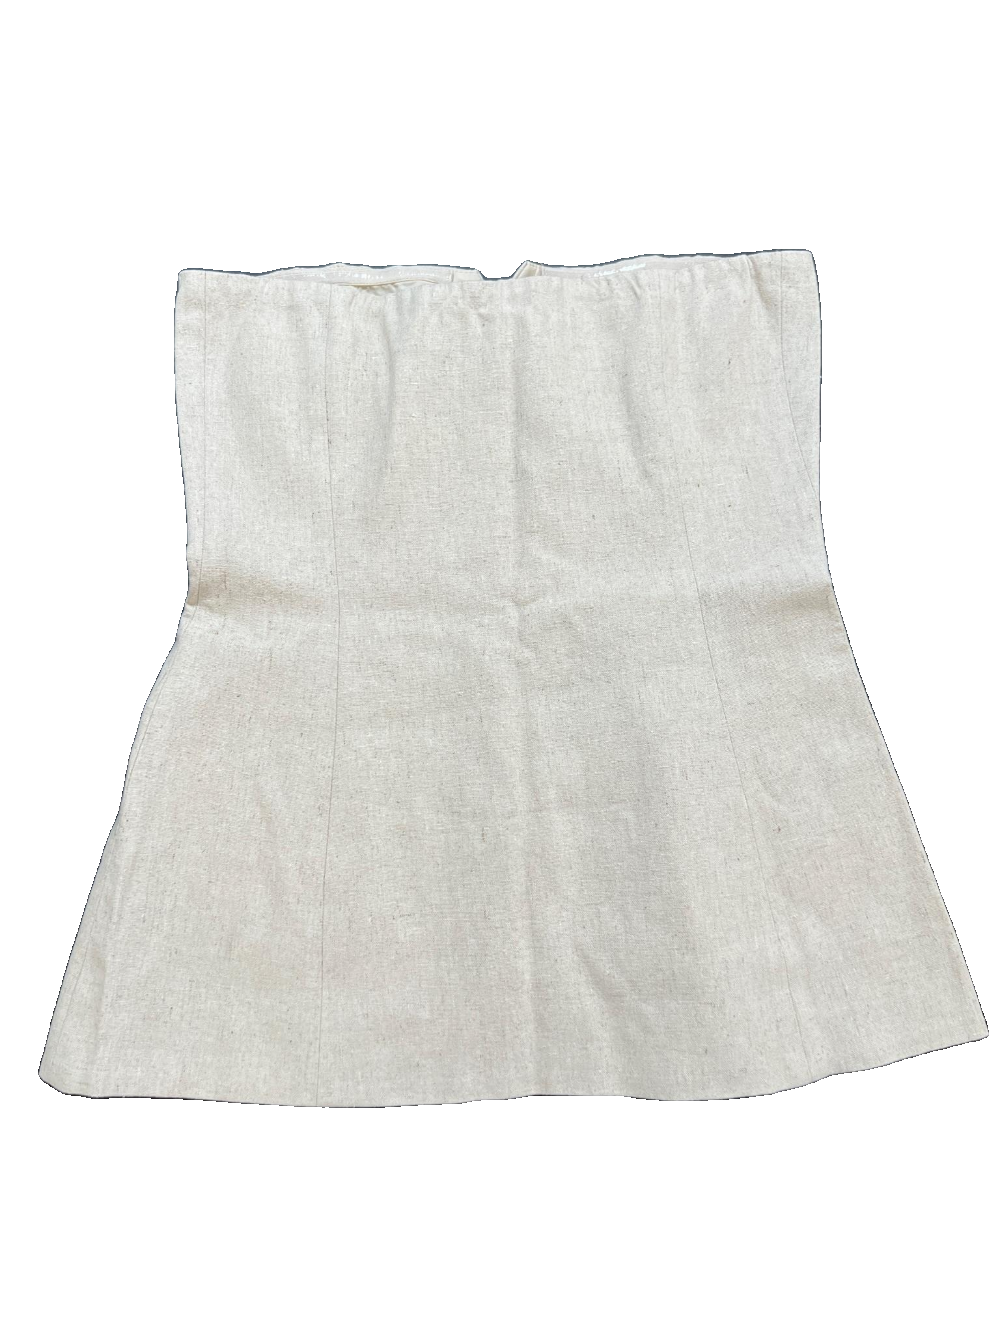 Meshki- Tan "Innis" Linen Crop Top NEW WITH TAGS